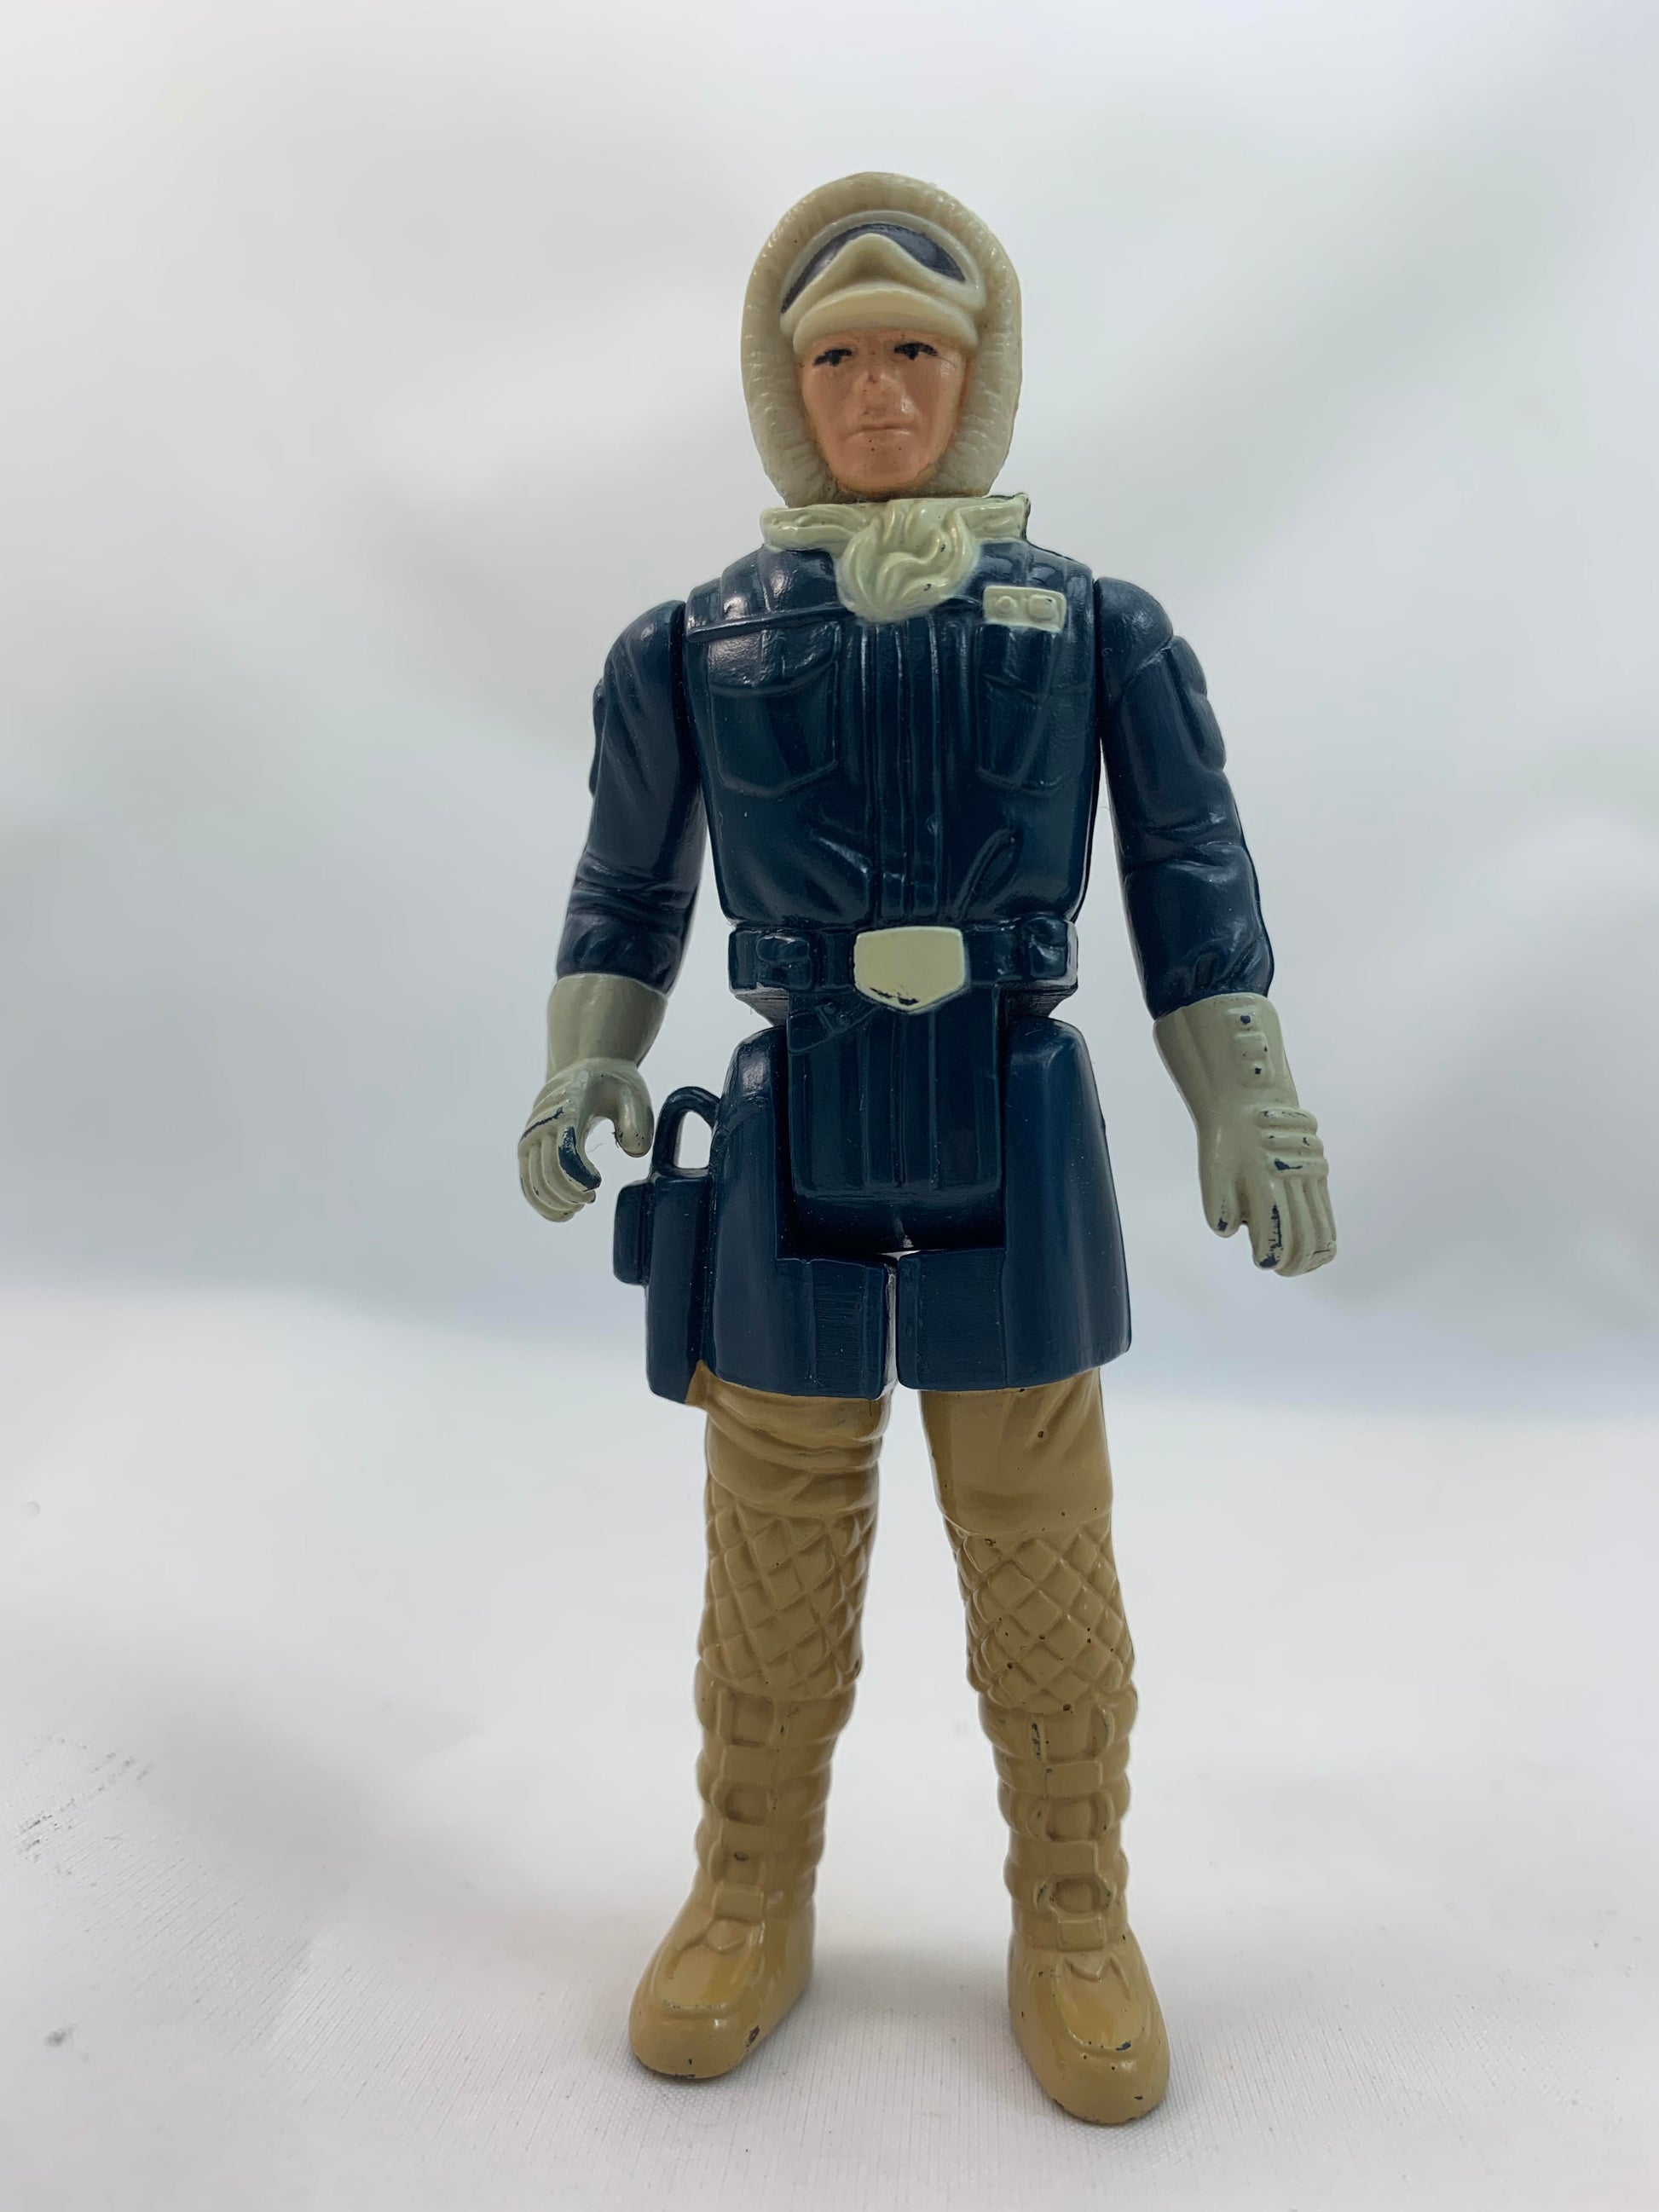 Kenner Vintage Star Wars: ROTJ Return of the Jedi Han Solo Hoth Gear COO LFL 1980 Hong Kong - Loose Action Figure